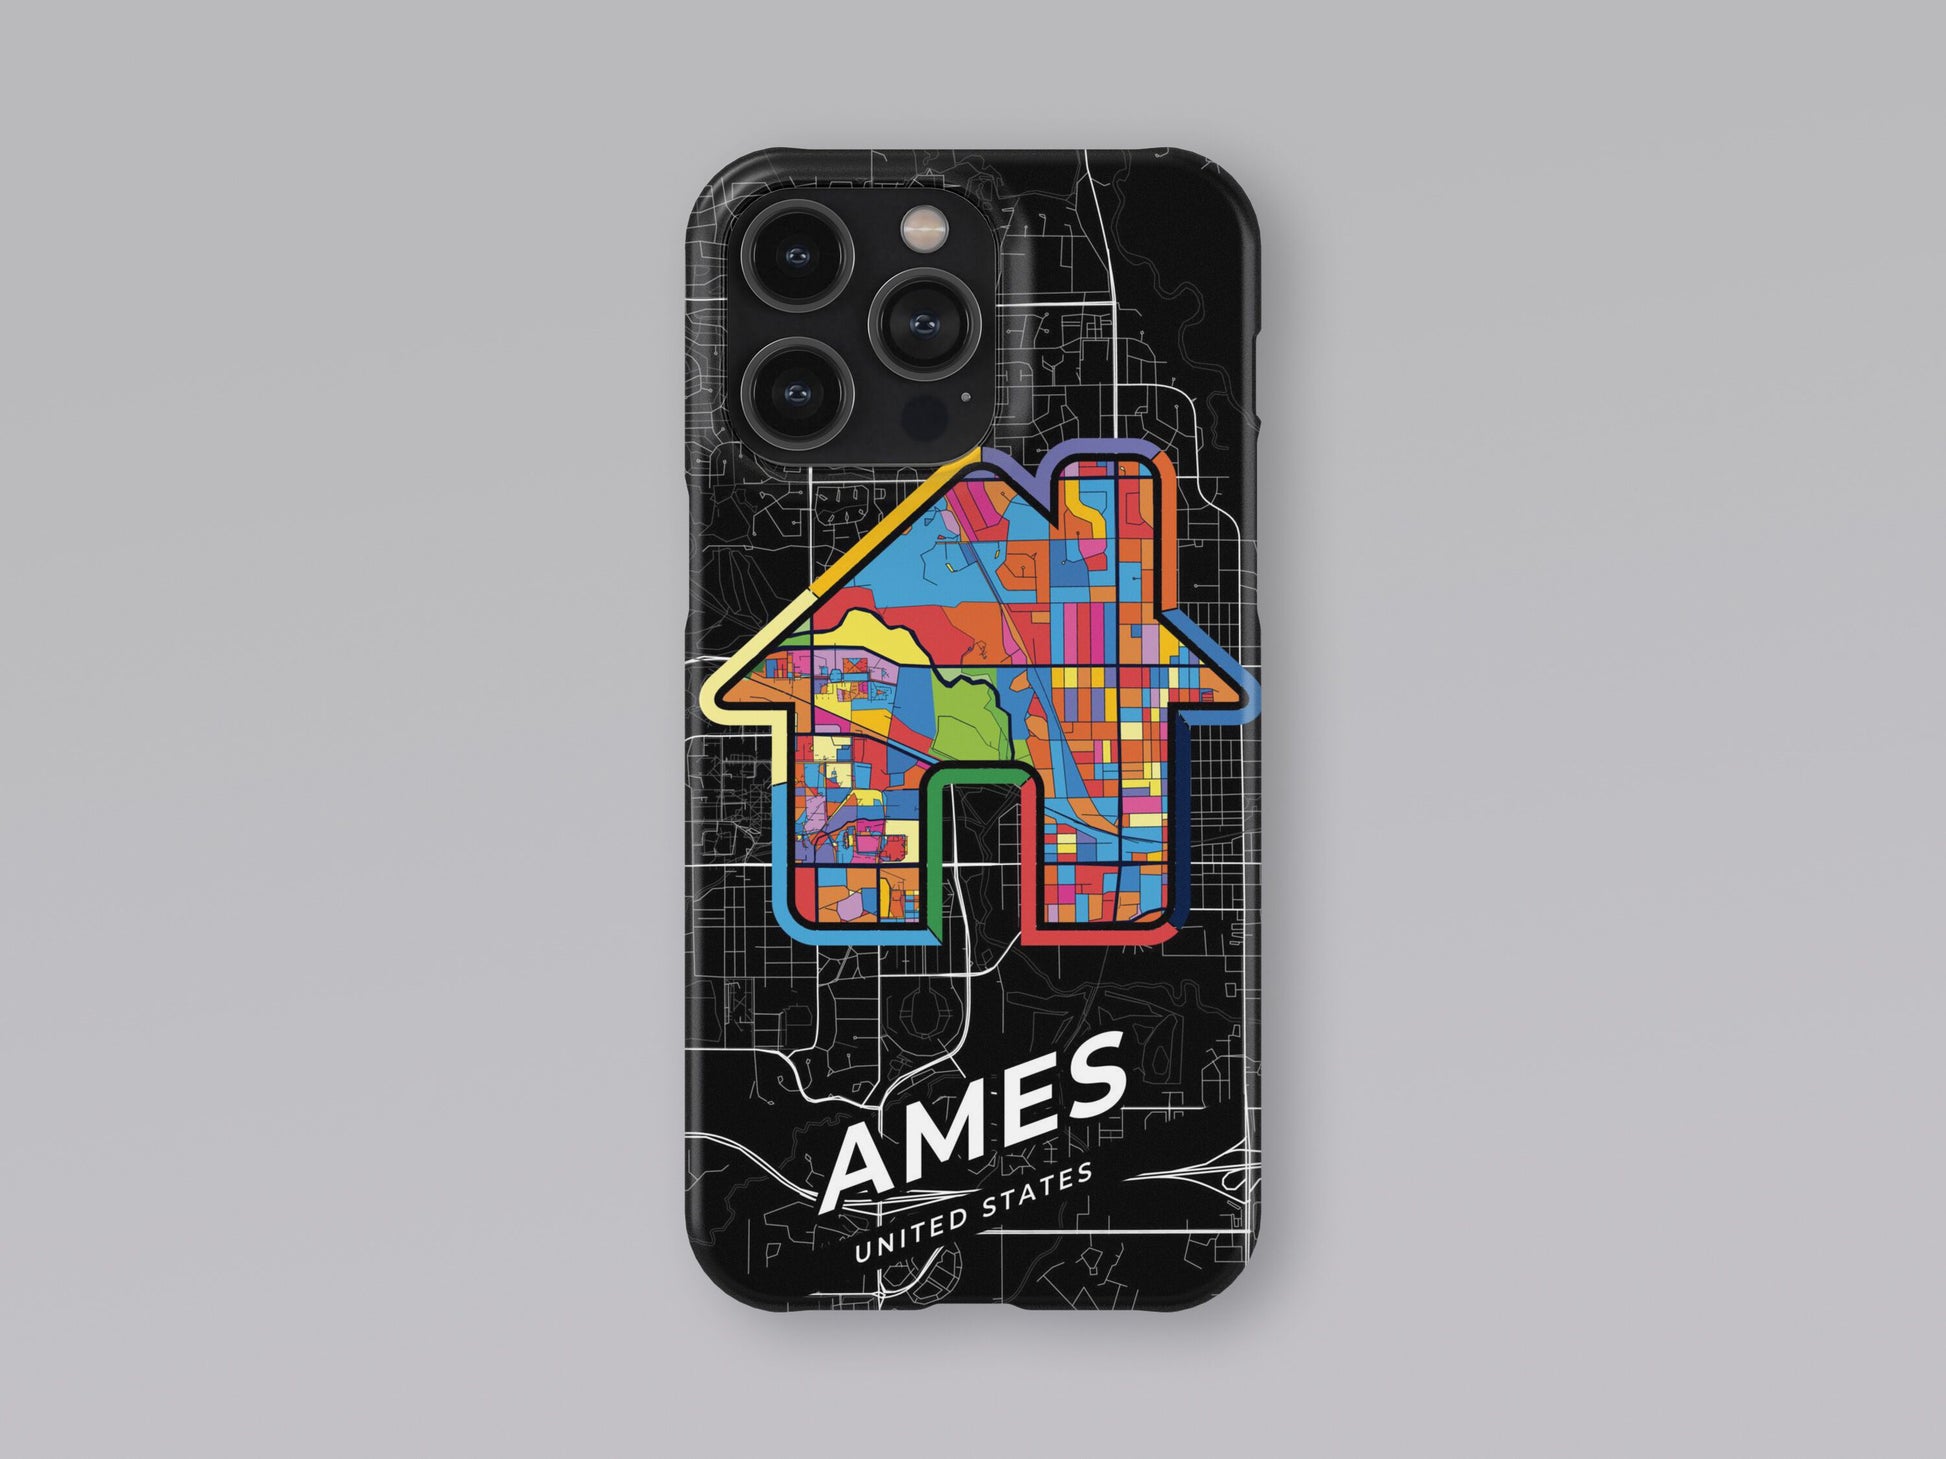 Ames Iowa slim phone case with colorful icon. Birthday, wedding or housewarming gift. Couple match cases. 3